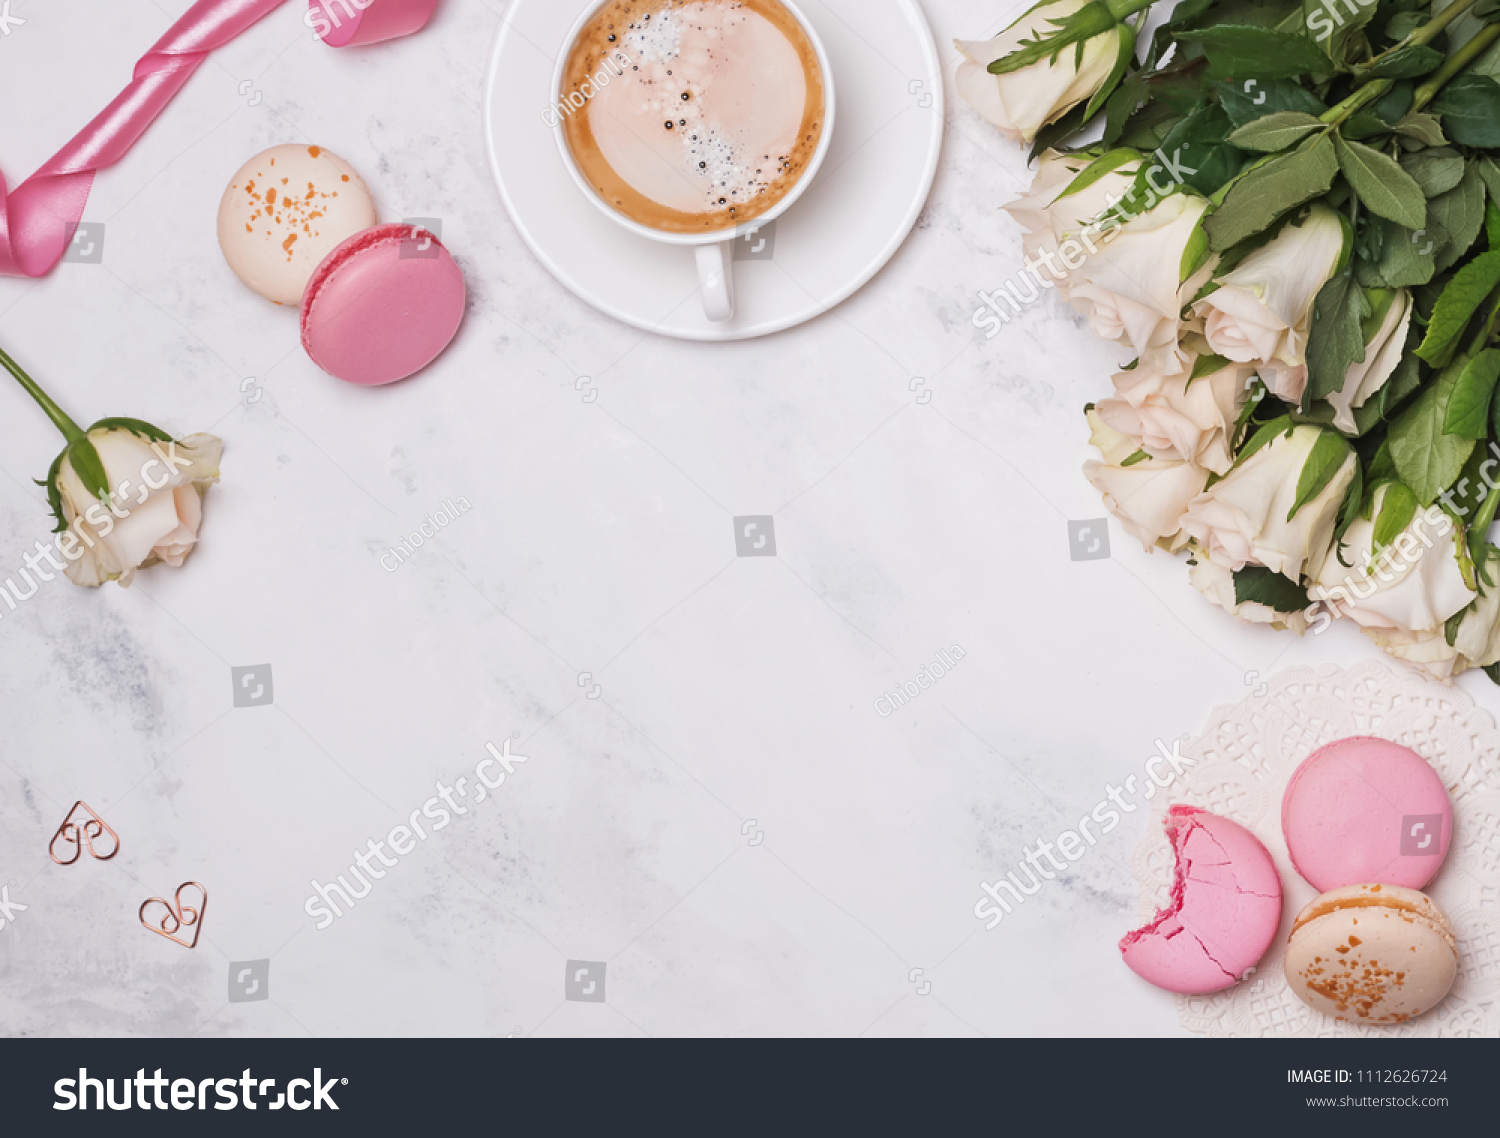 Stylish flat lay with macarons, coffee and roses #1112626724